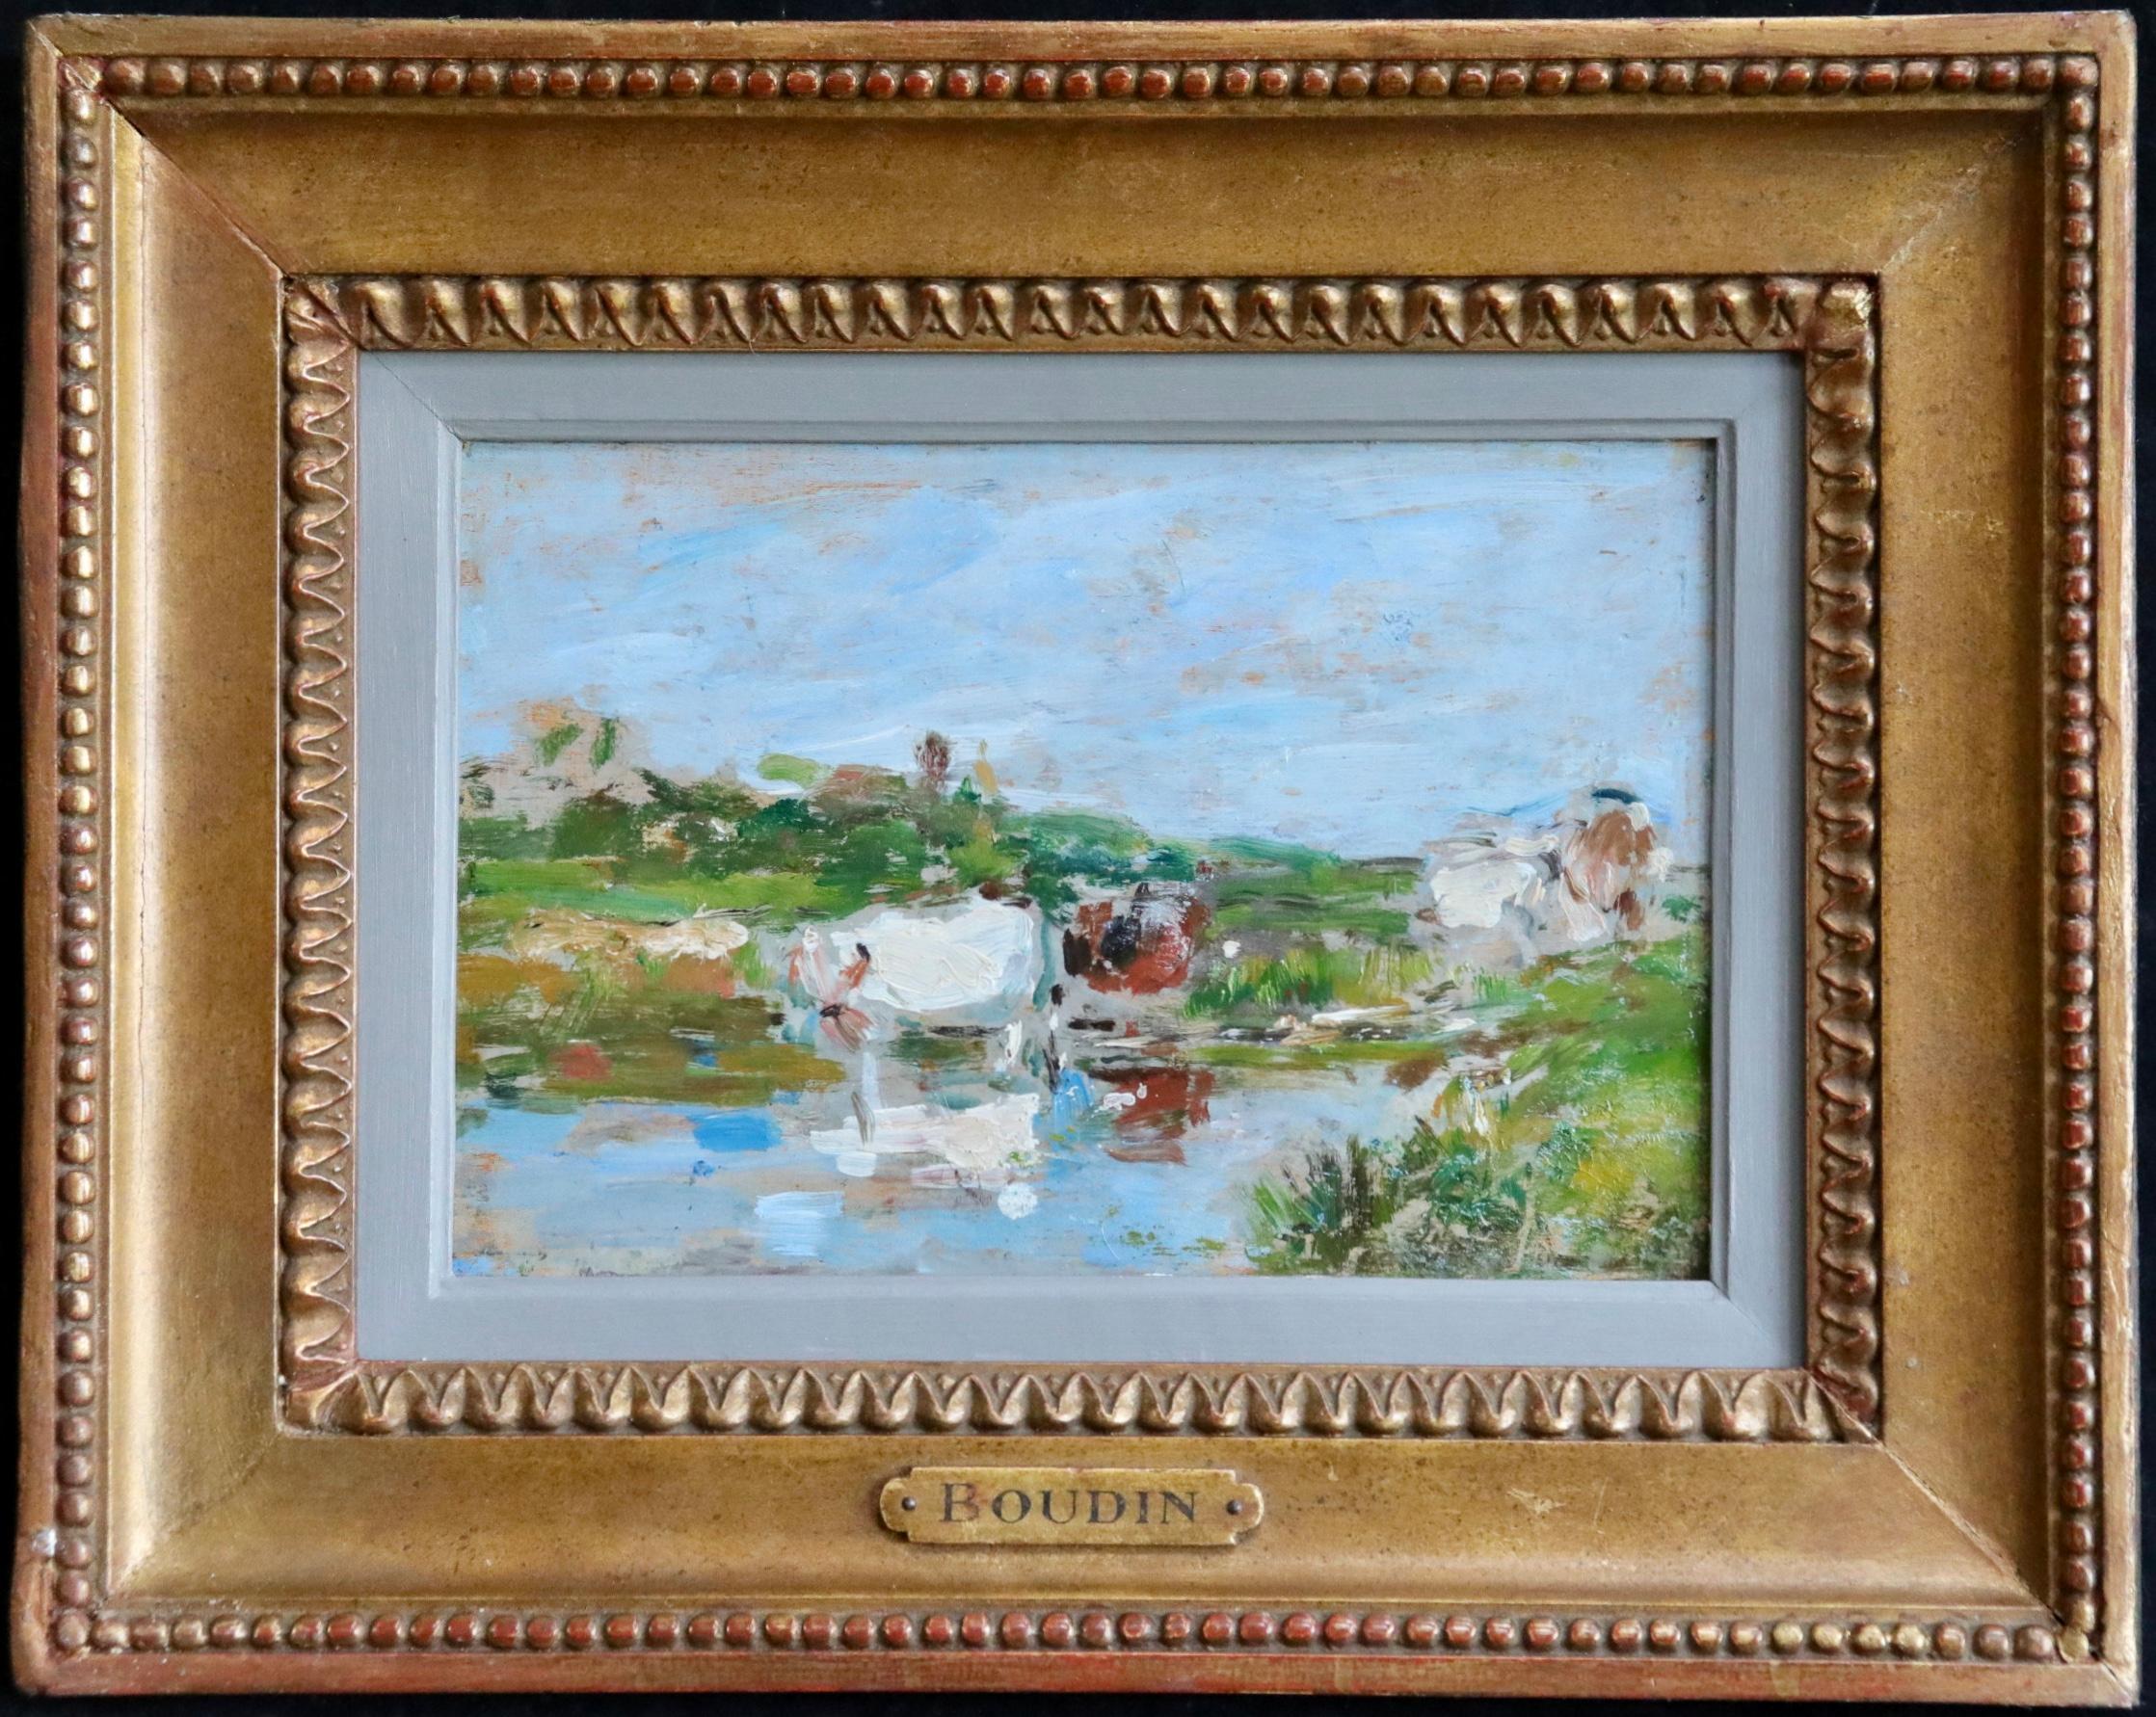 Les Vaches - 19th Century Oil, Cows in River in Landscape by Eugene Louis Boudin - Painting by Eugène Louis Boudin